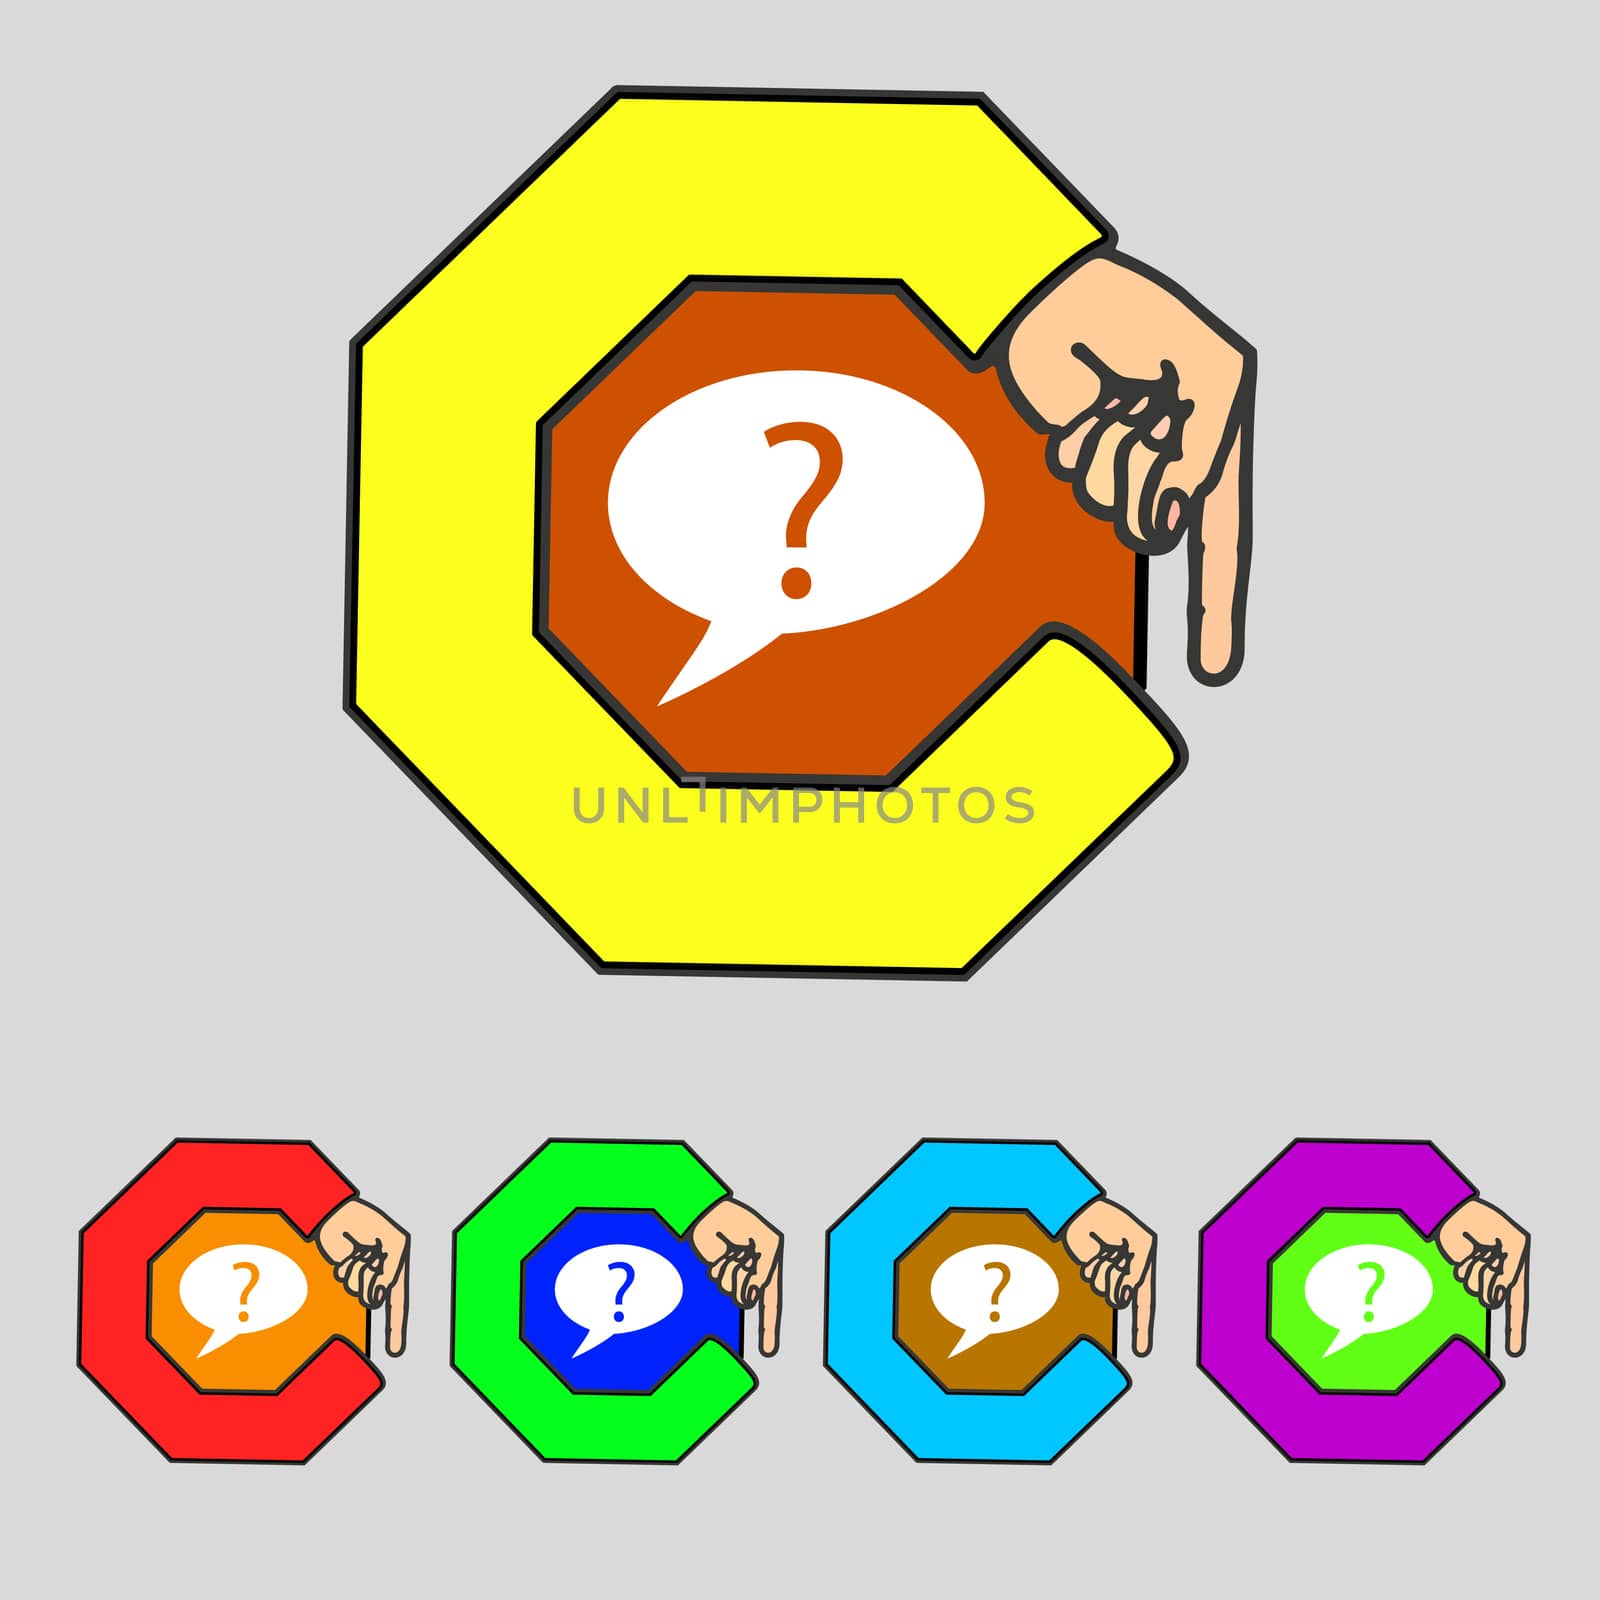 Question mark sign icon. Help speech bubble symbol. FAQ sign Set colourful buttons illustration